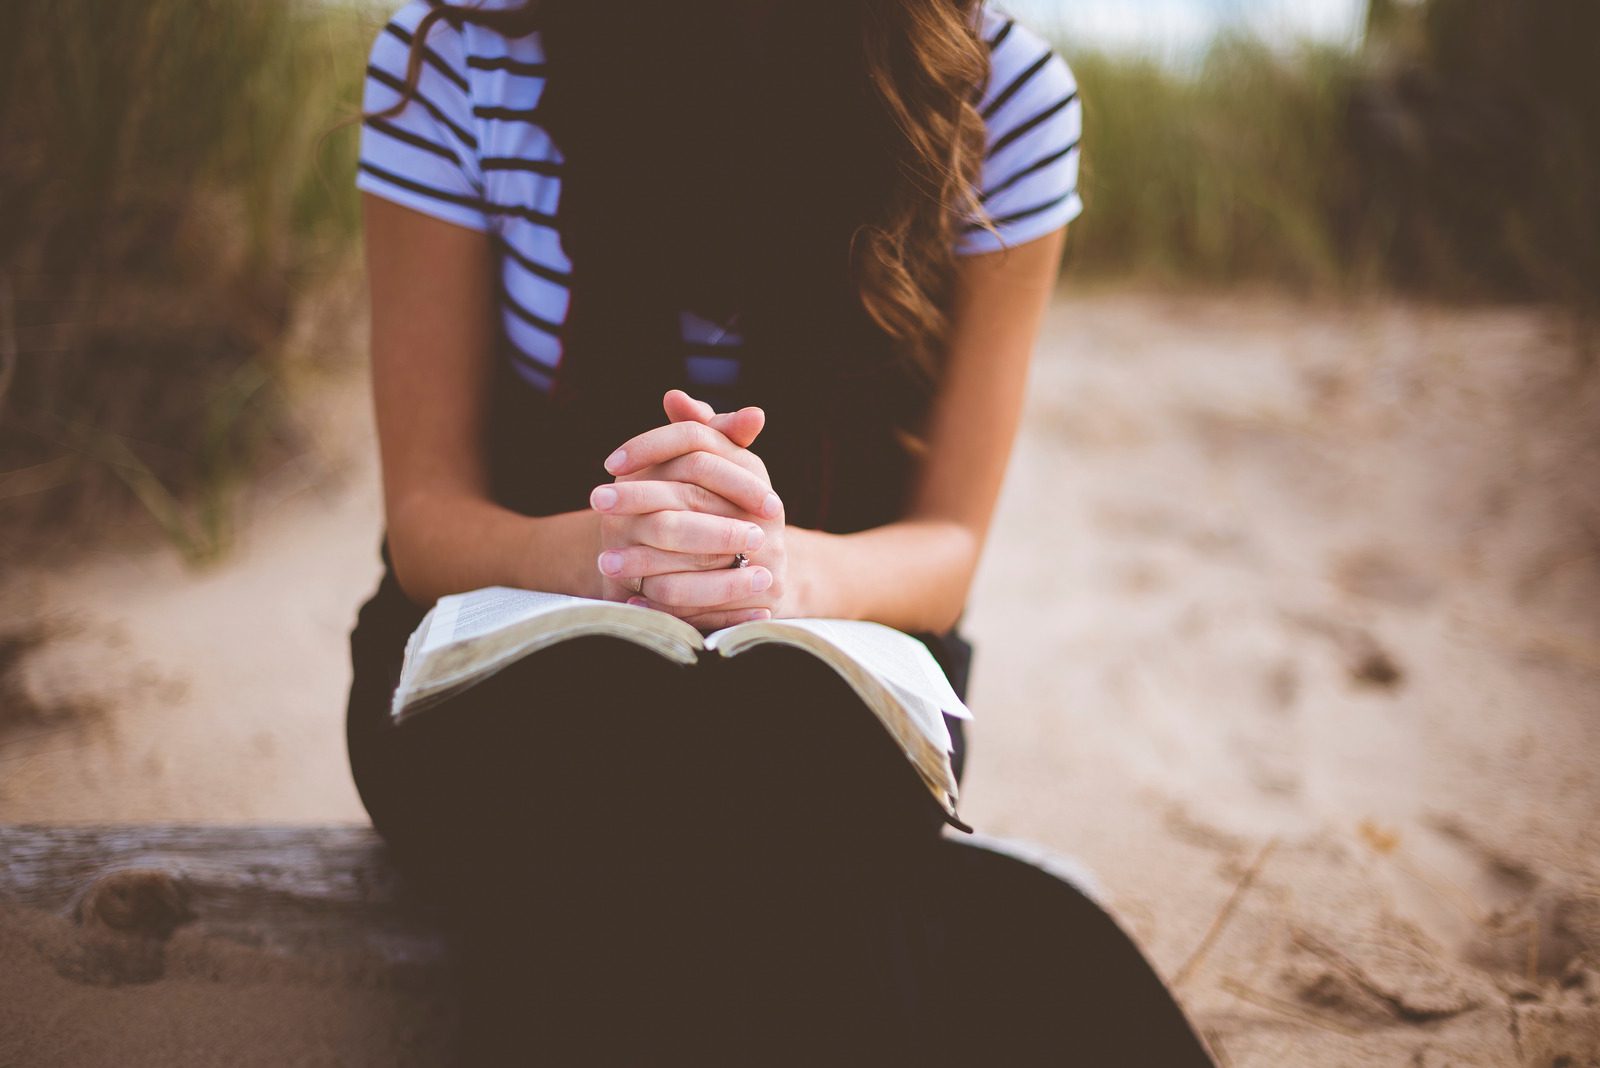 Soft focus image of a woman with praying hands resting on an open Bible. Behind her is a beach scene with sand and sea grass.